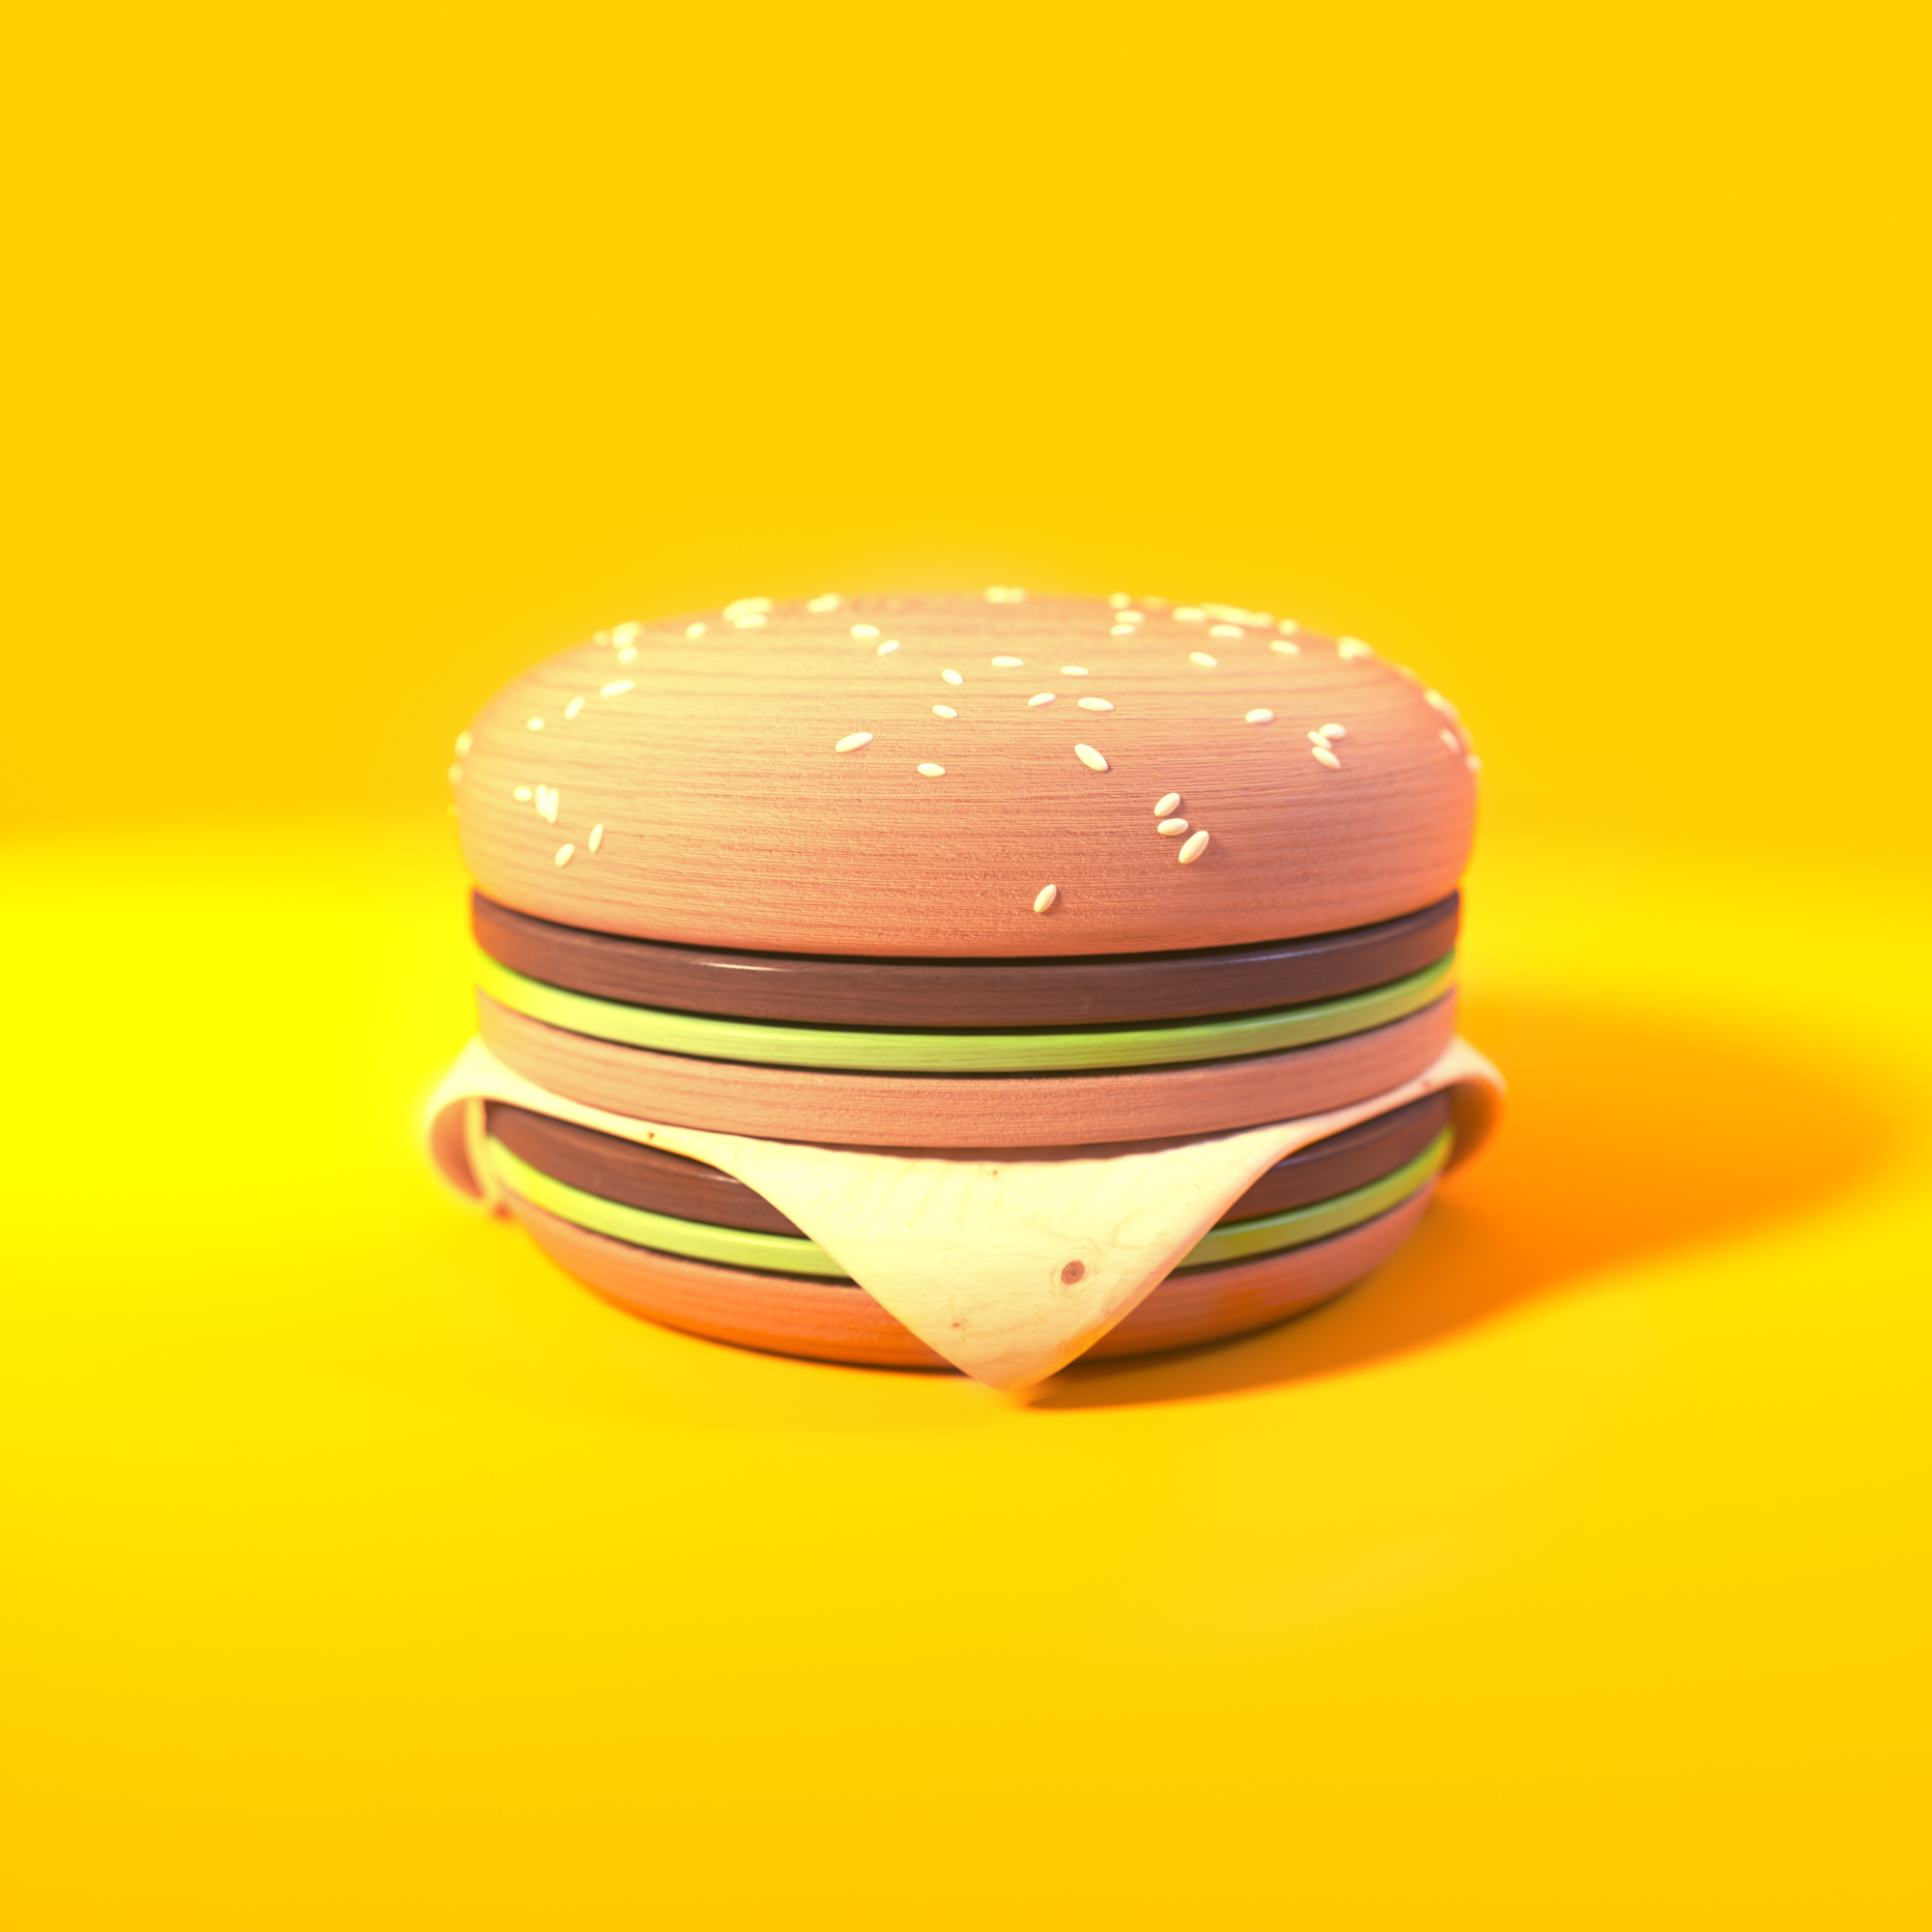 A Big Mac made out of wood that somehow still looks delicous.